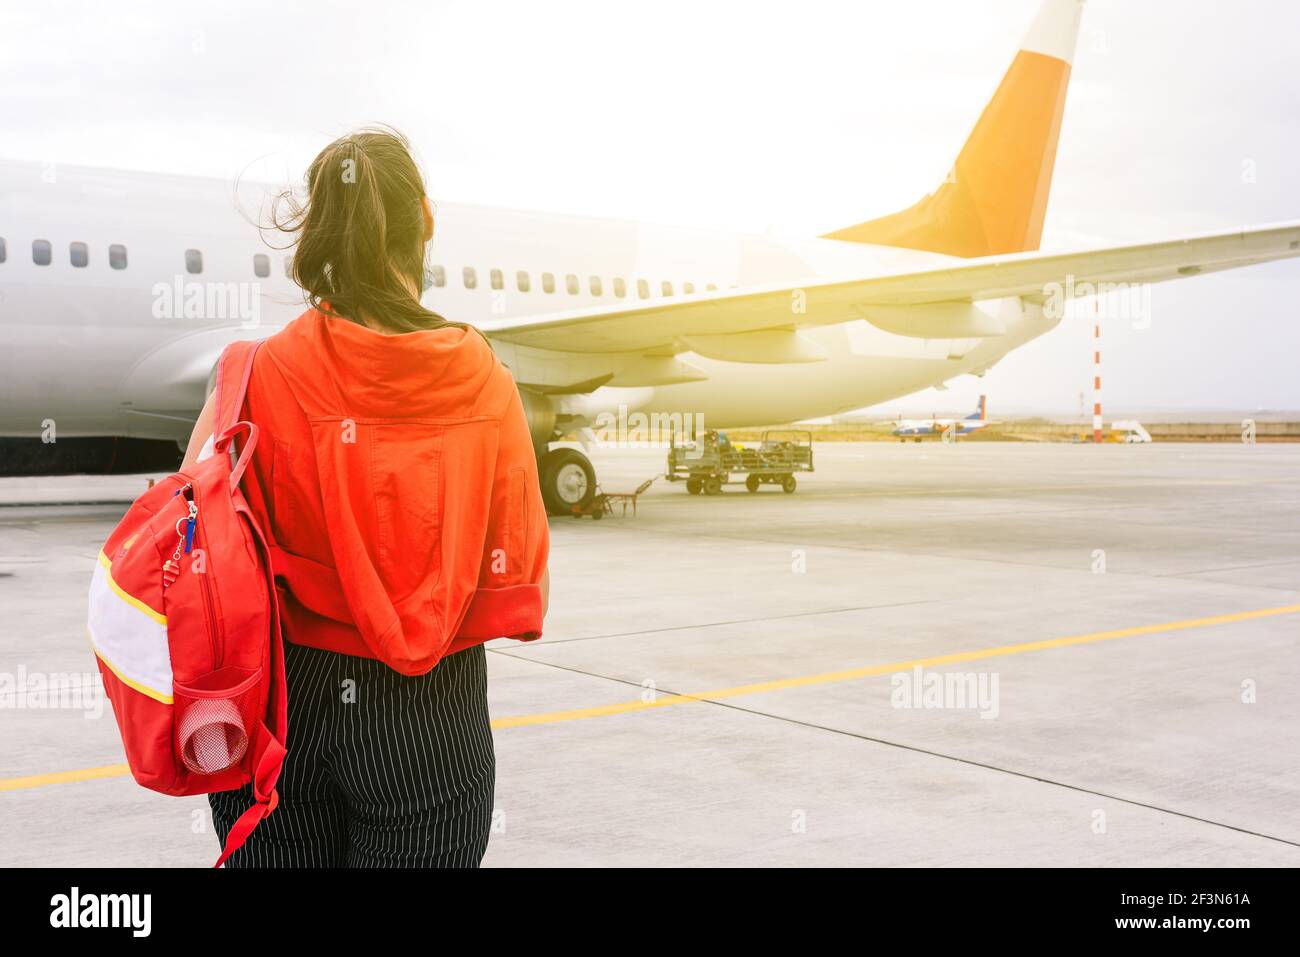 The girl is standing near the plane waiting for departure. Boarding passengers on the flight. Young traveler at the airport. Travel and tourism concep Stock Photo